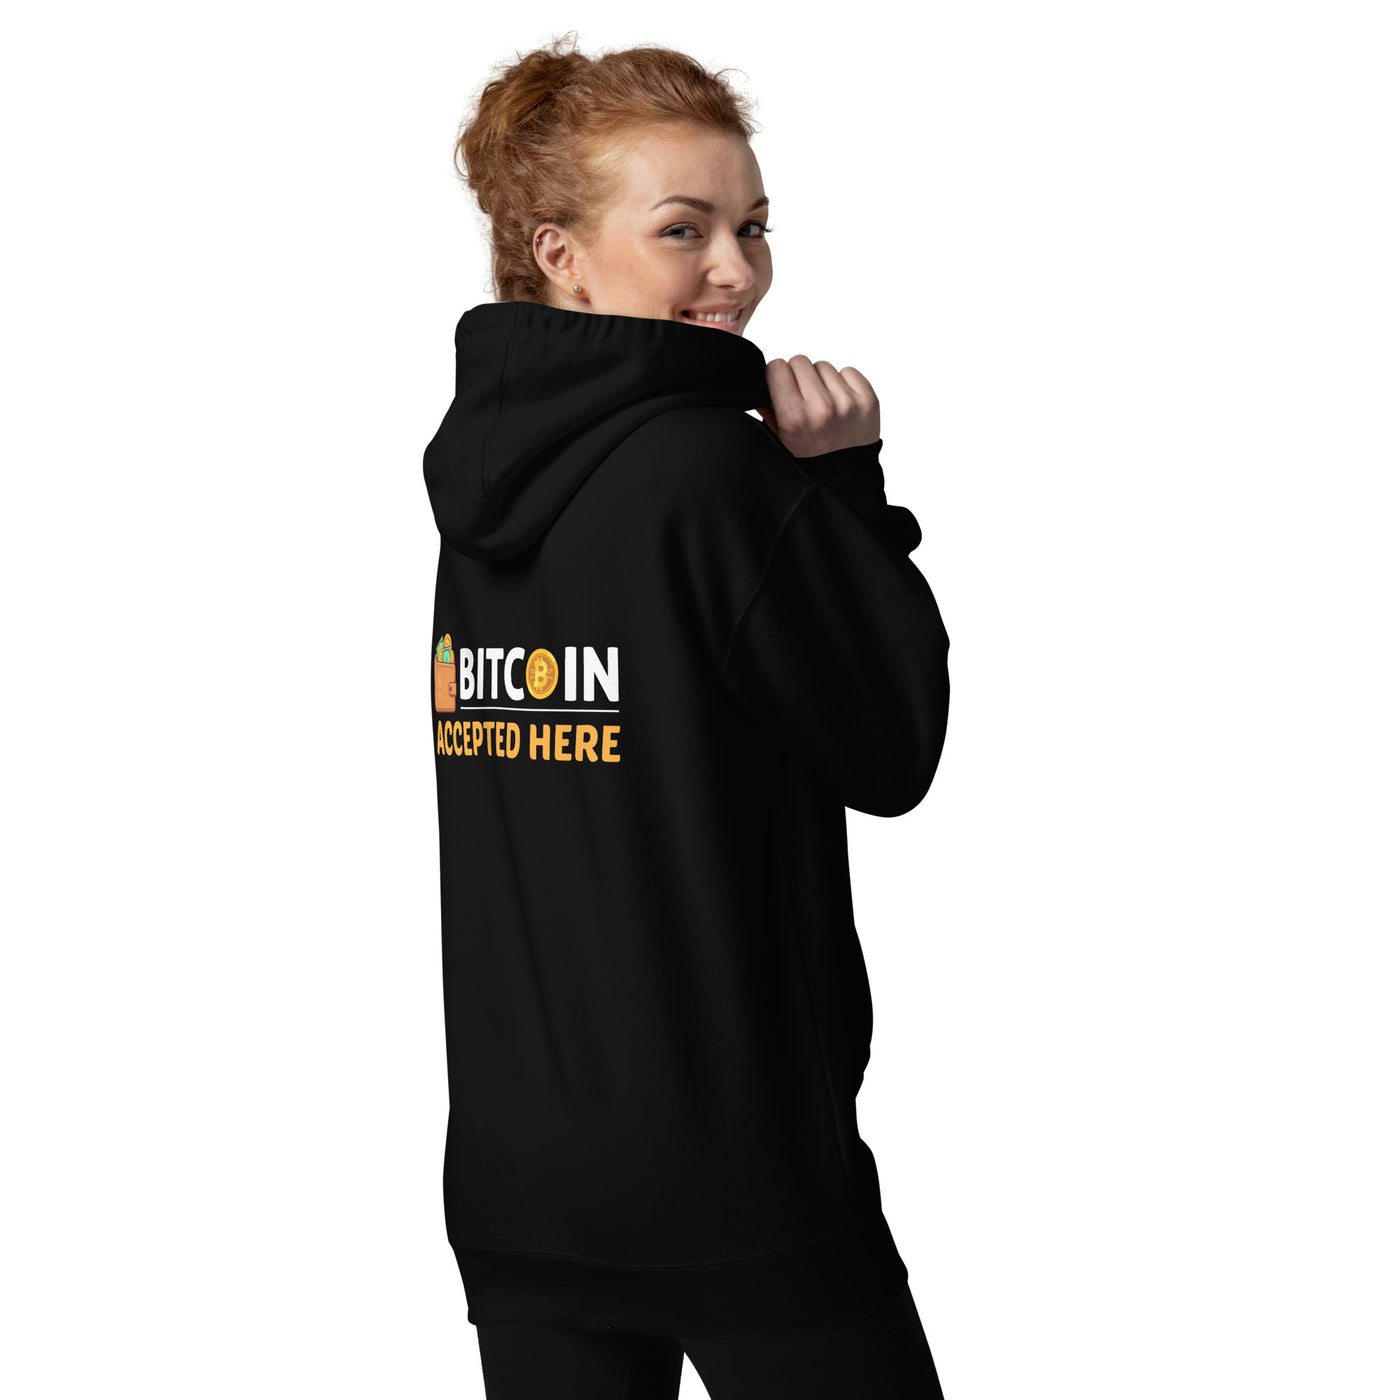 Bitcoin Accepted Here - Unisex Hoodie  ( Back Print )